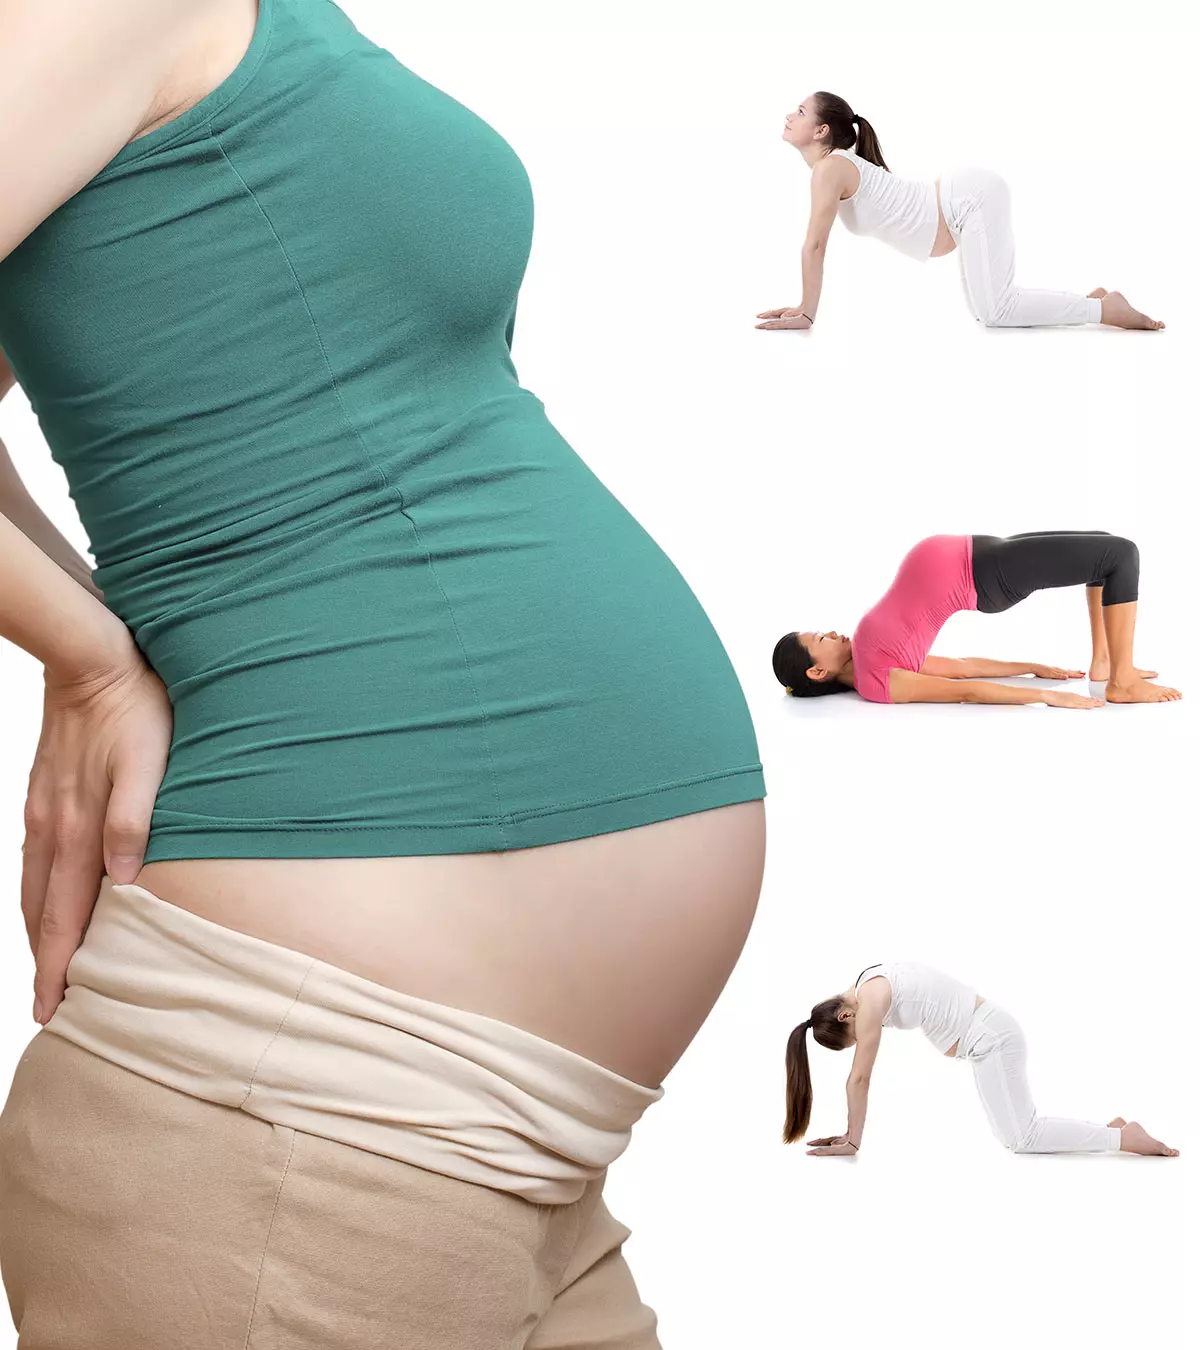 7 Effective Stretches To Ease Tailbone Pain During Pregnancy